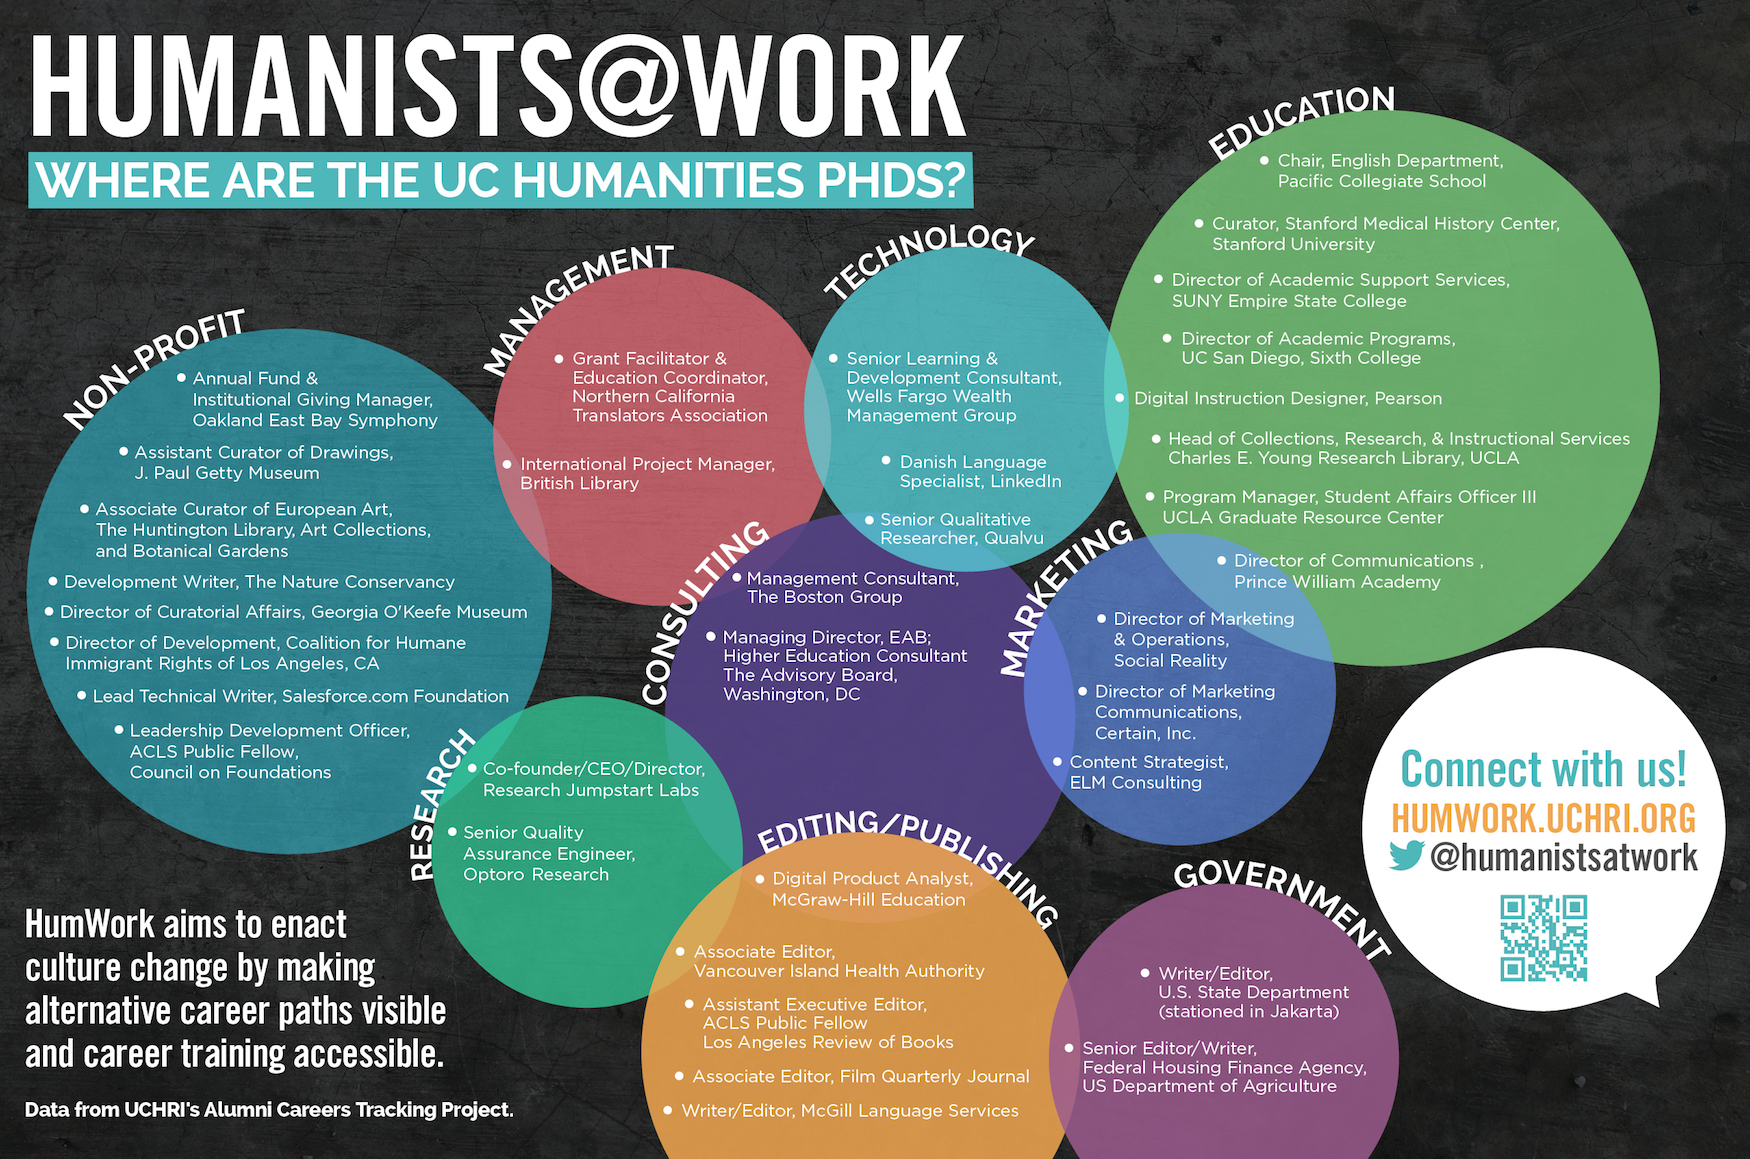 Humanists@Work: Where are the UC Humanities PhDs?